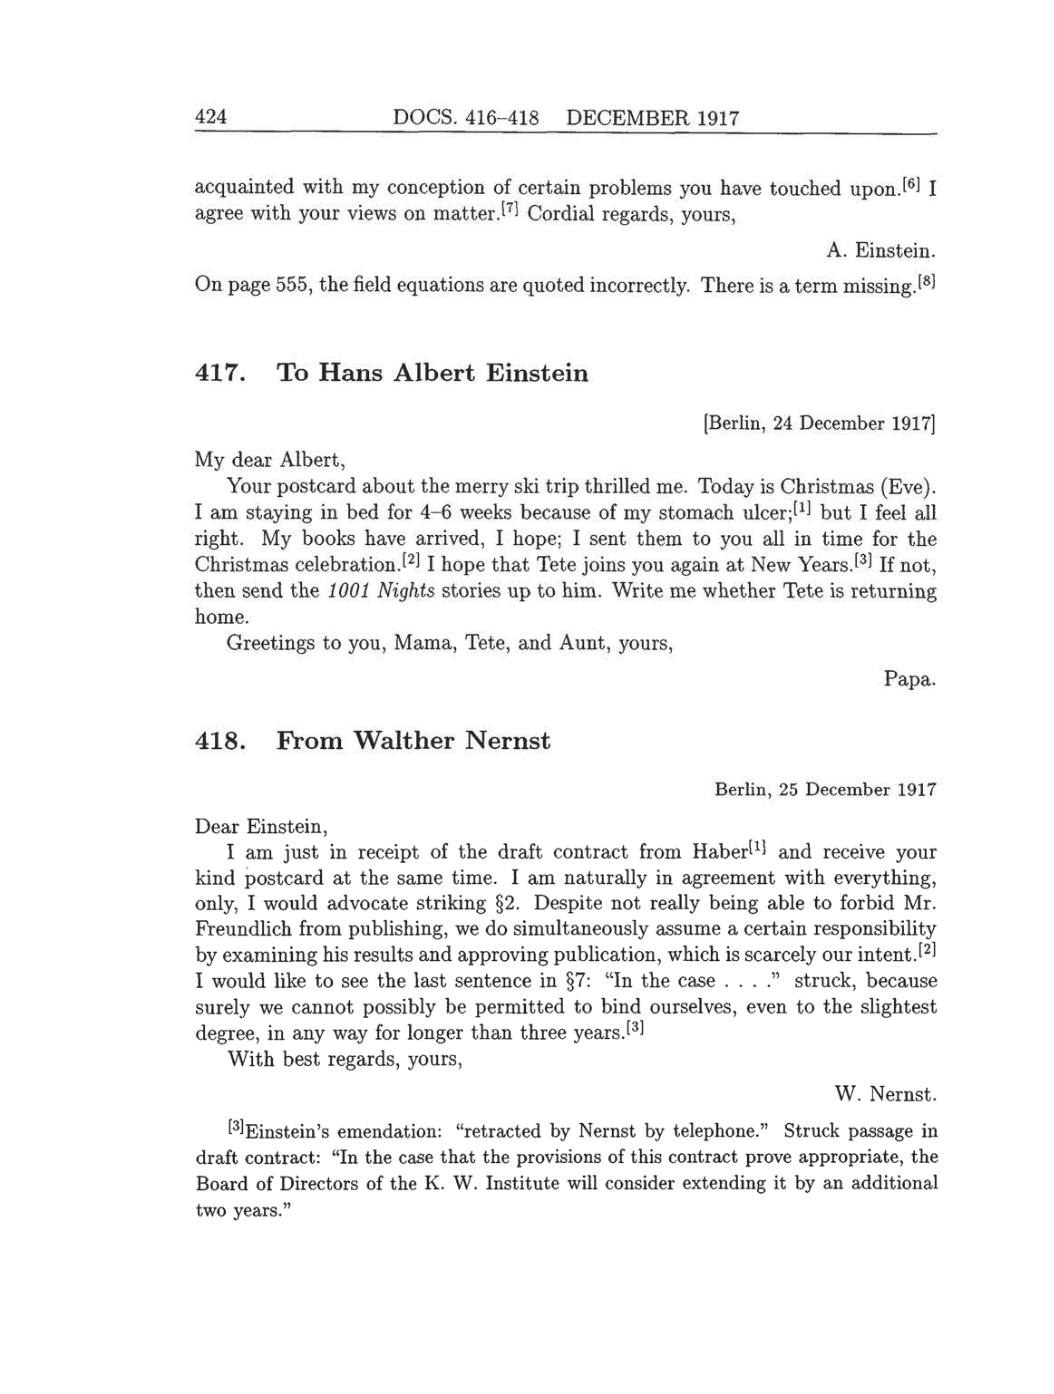 Volume 8: The Berlin Years: Correspondence, 1914-1918 (English translation supplement) page 424